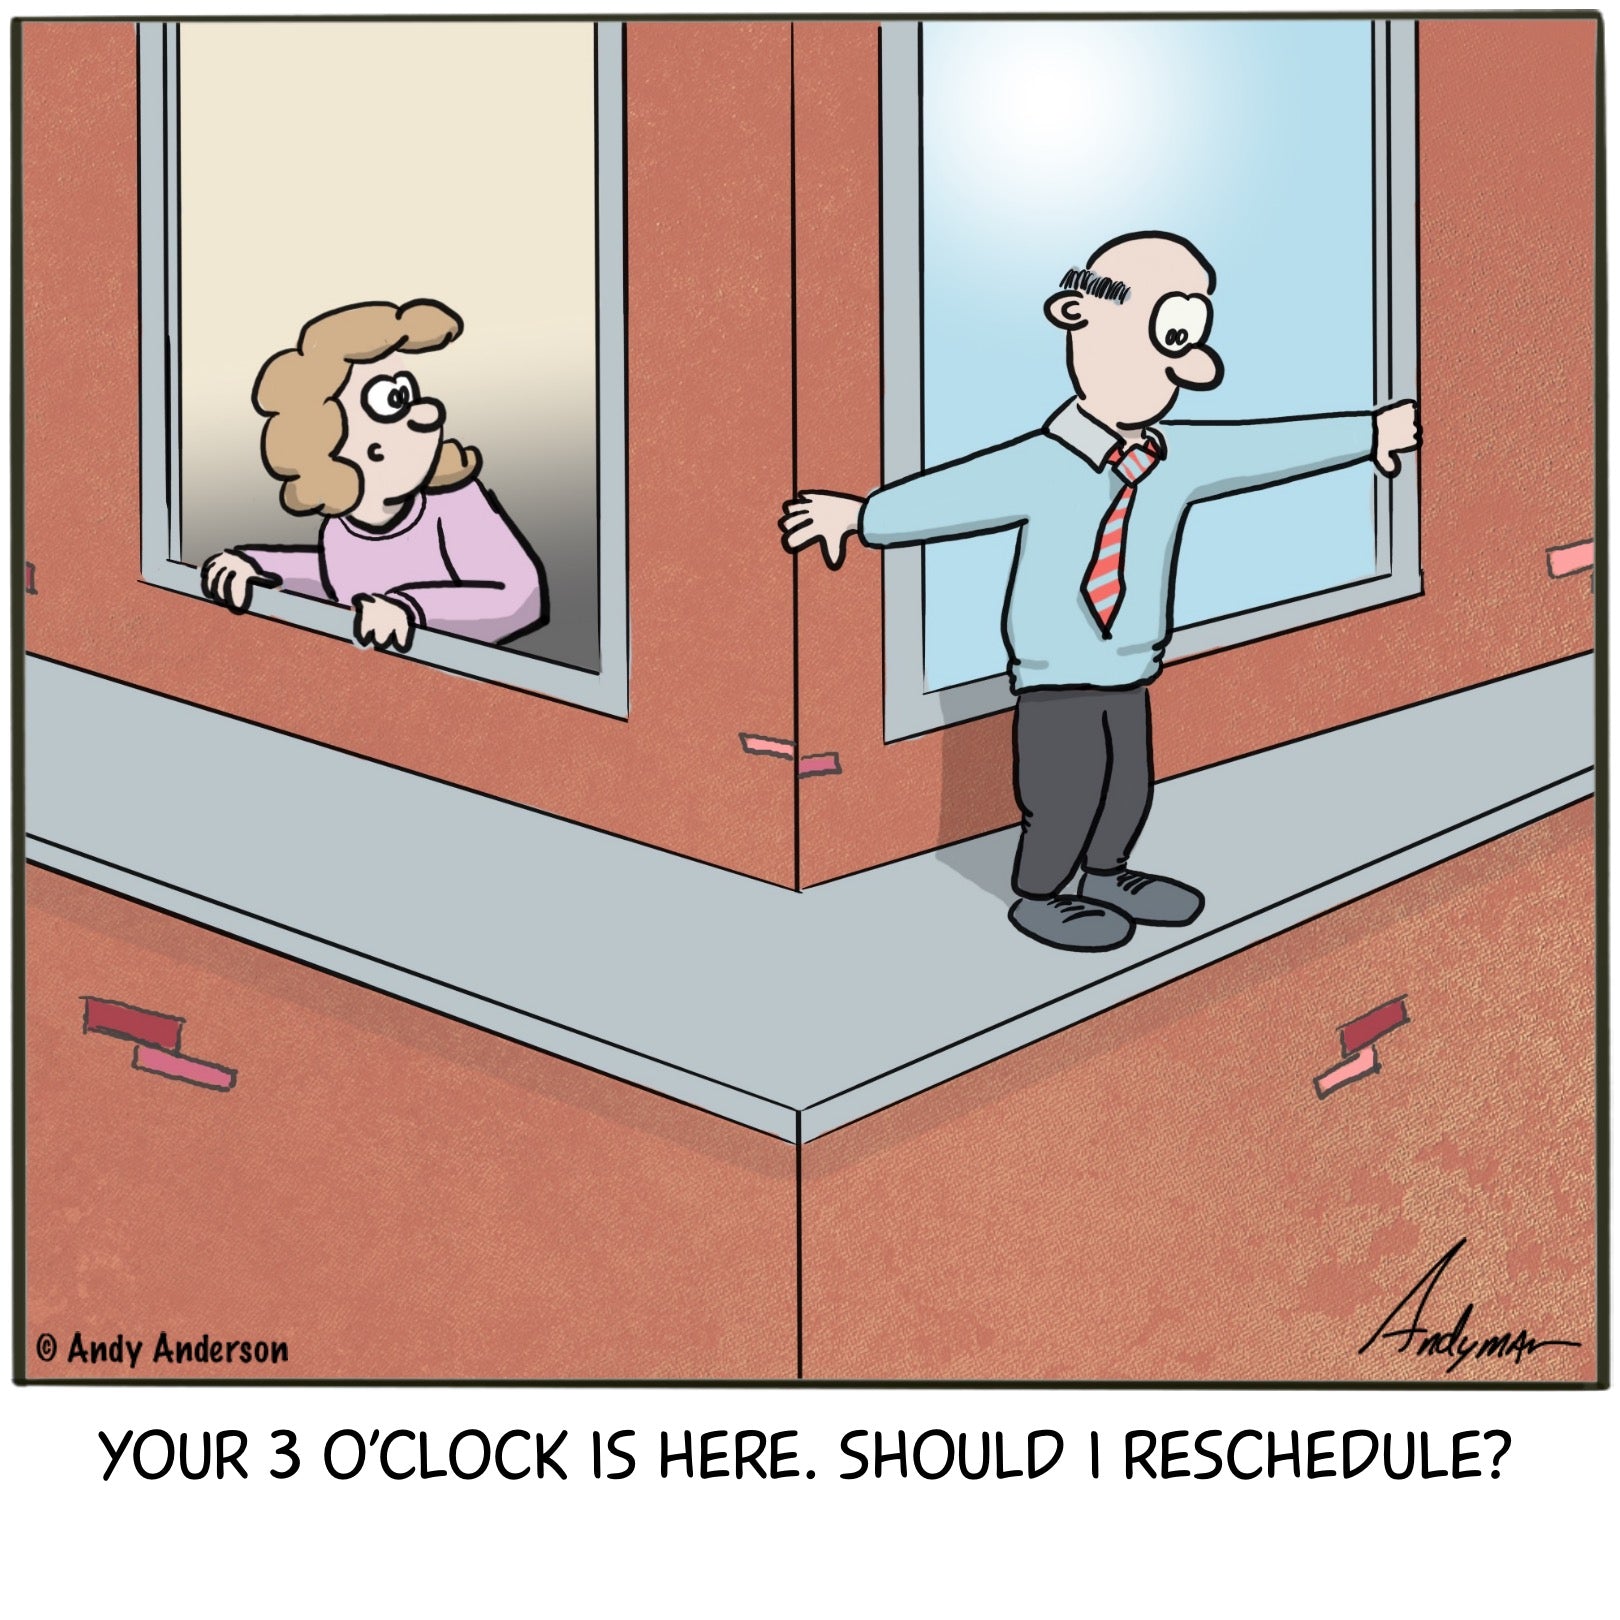 Cartoon about an assistant asking man on ledge if she should reschedule